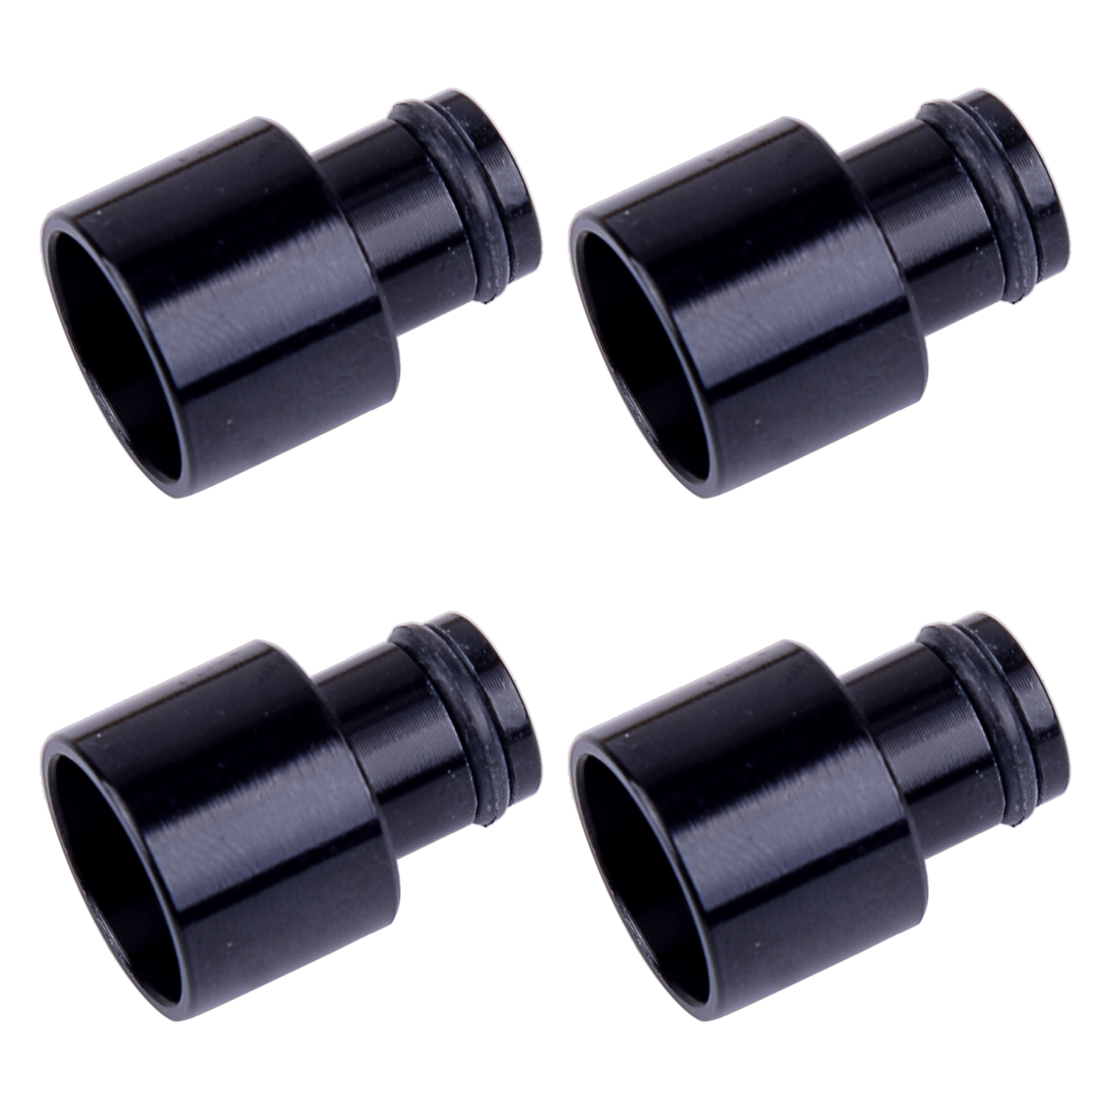 HERCHR Fuel Injector Top Hat Adapter Fitting for Acura Integra Civic B D Series B16 B18 RDX 